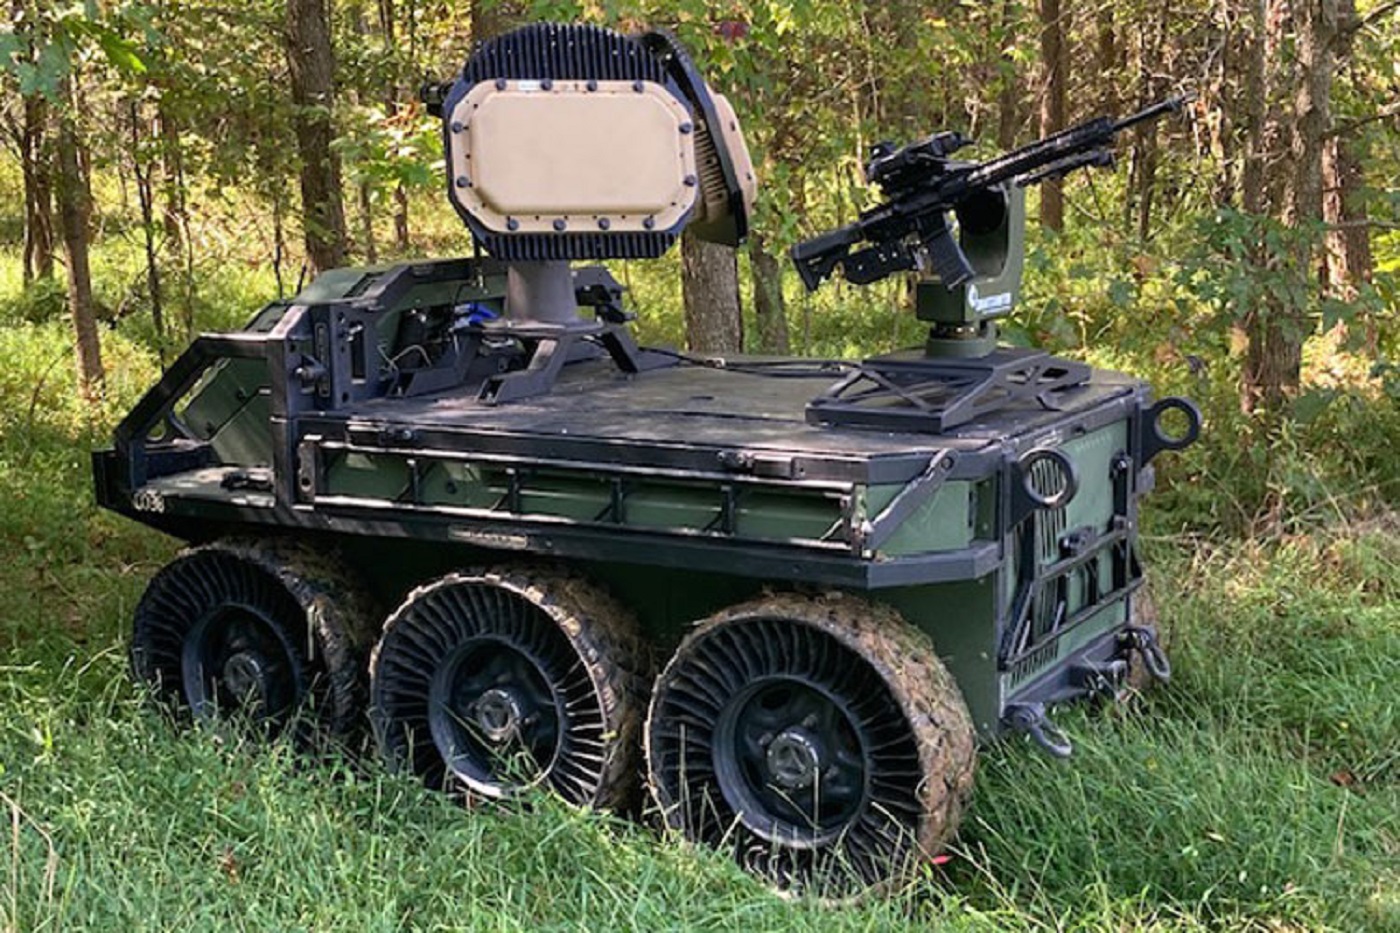 SMARTSHOOTER Awarded US Army Contract for Additional SMASH 2000L Fire Control Systems